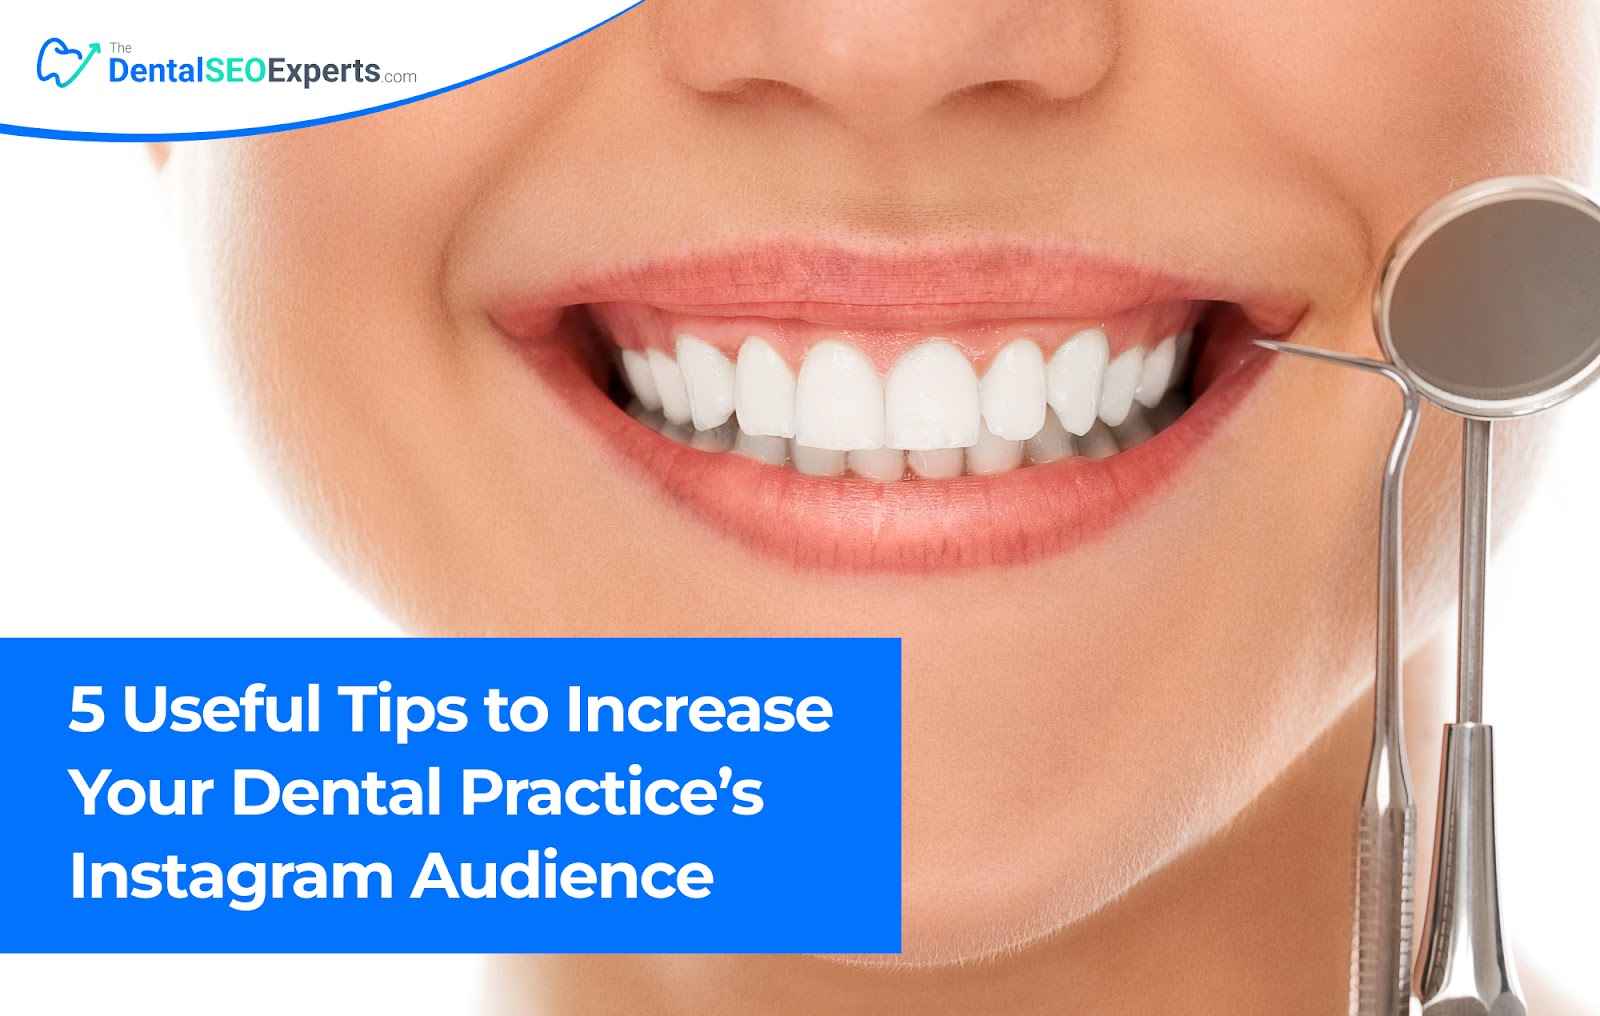 5 Useful Tips to Increase Your Dental Practice’s Instagram Audience